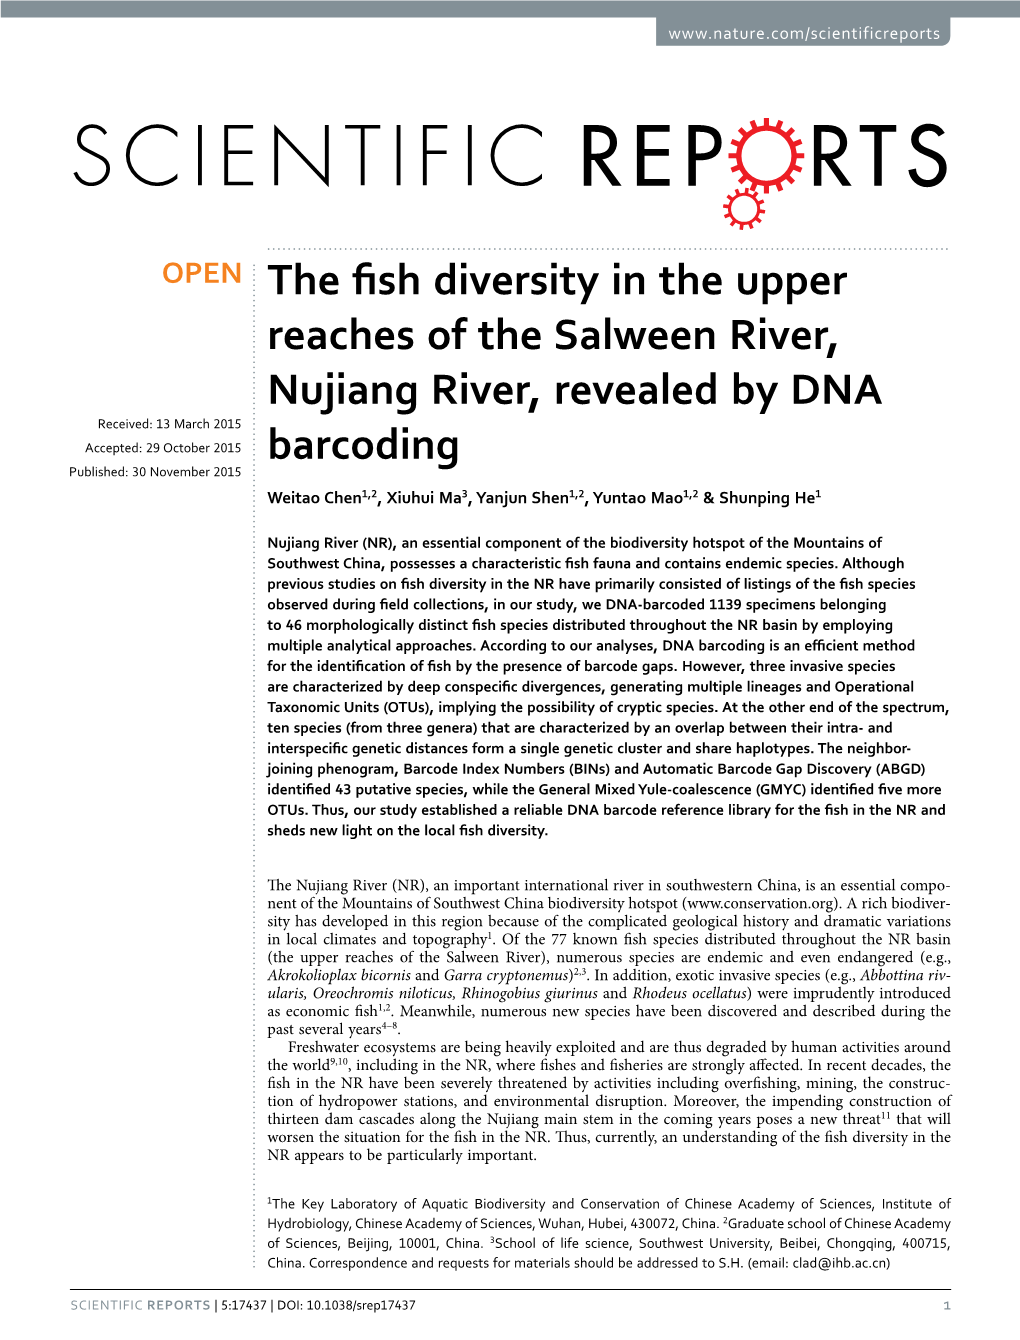 The Fish Diversity in the Upper Reaches of the Salween River, Nujiang River